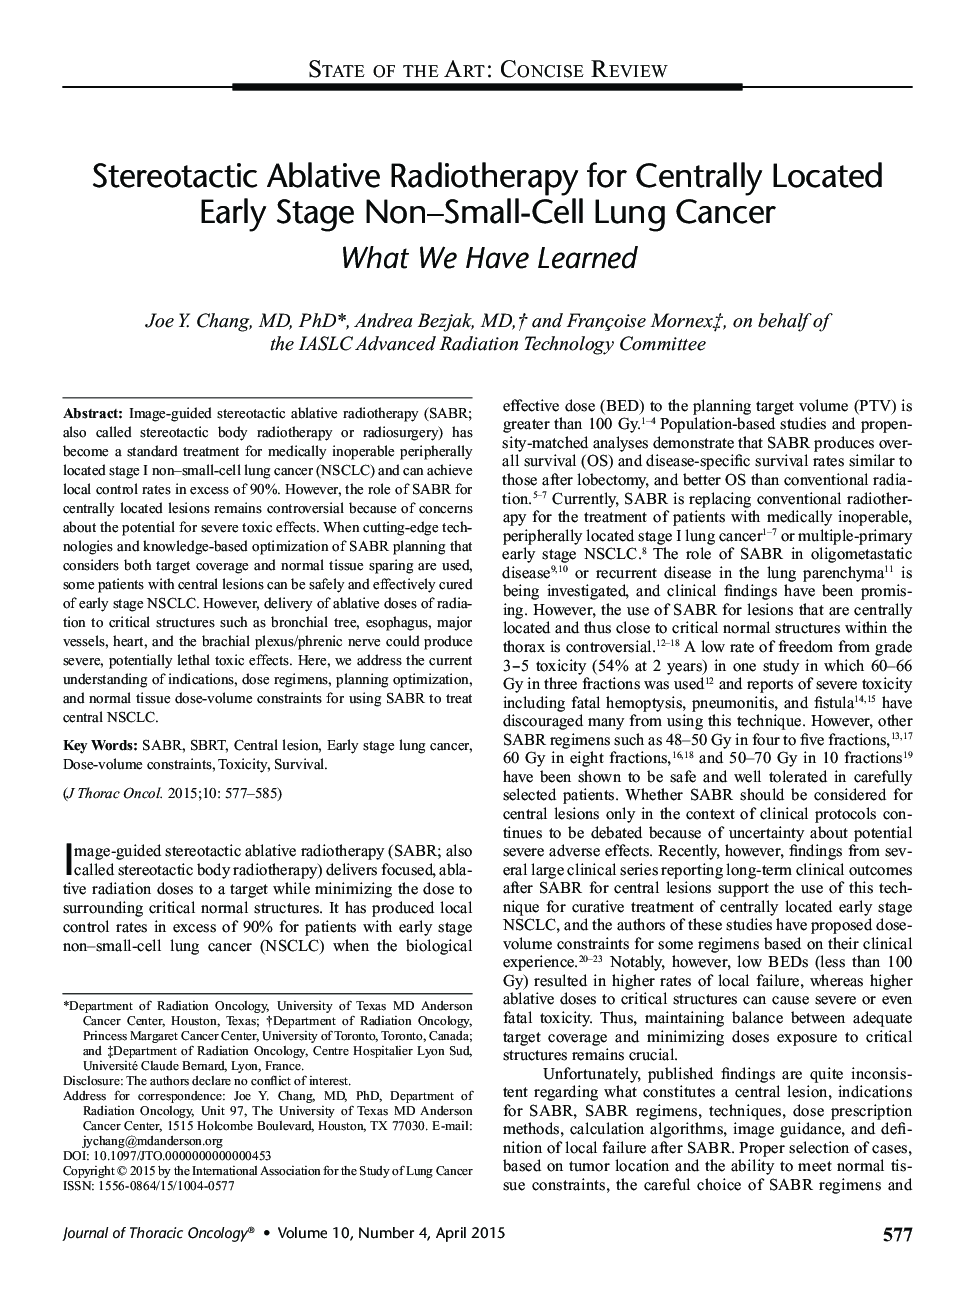 Stereotactic Ablative Radiotherapy for Centrally Located Early Stage Non-Small-Cell Lung Cancer: What We Have Learned